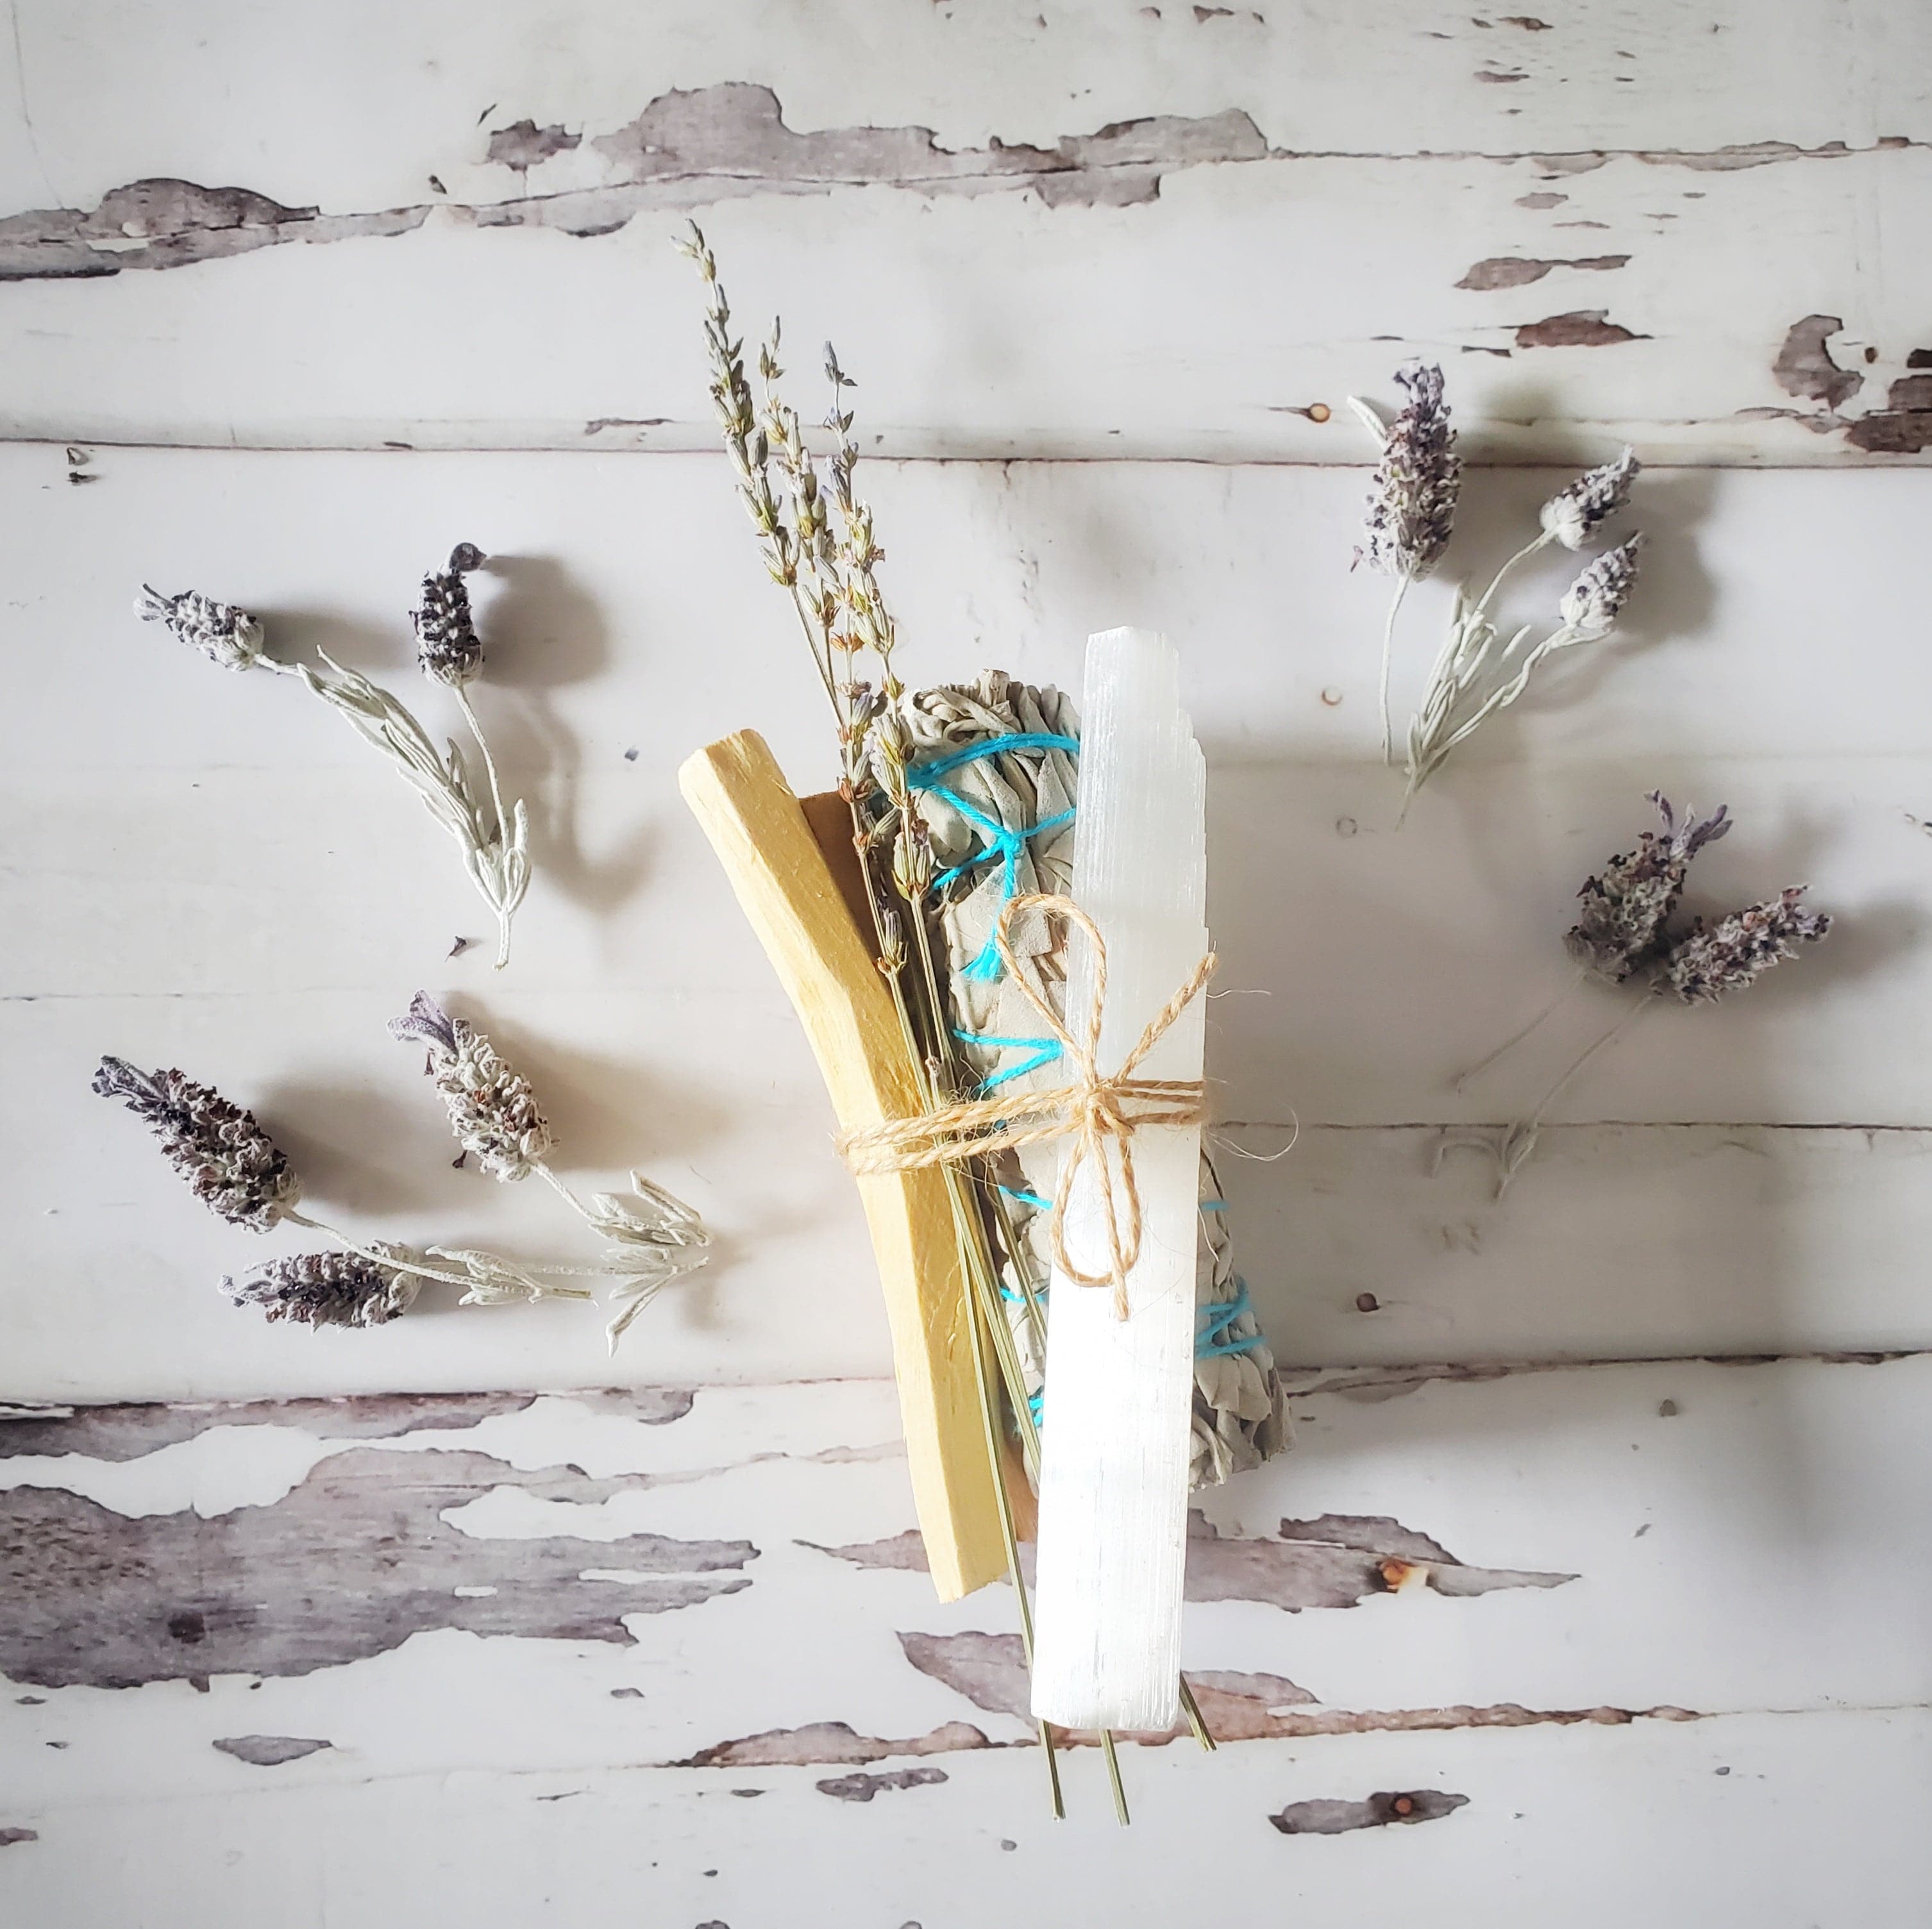 PALO SANTO SMUDGE WANDS: 7 Pack For Spiritual Cleansing, Healing,  Enlightenment.